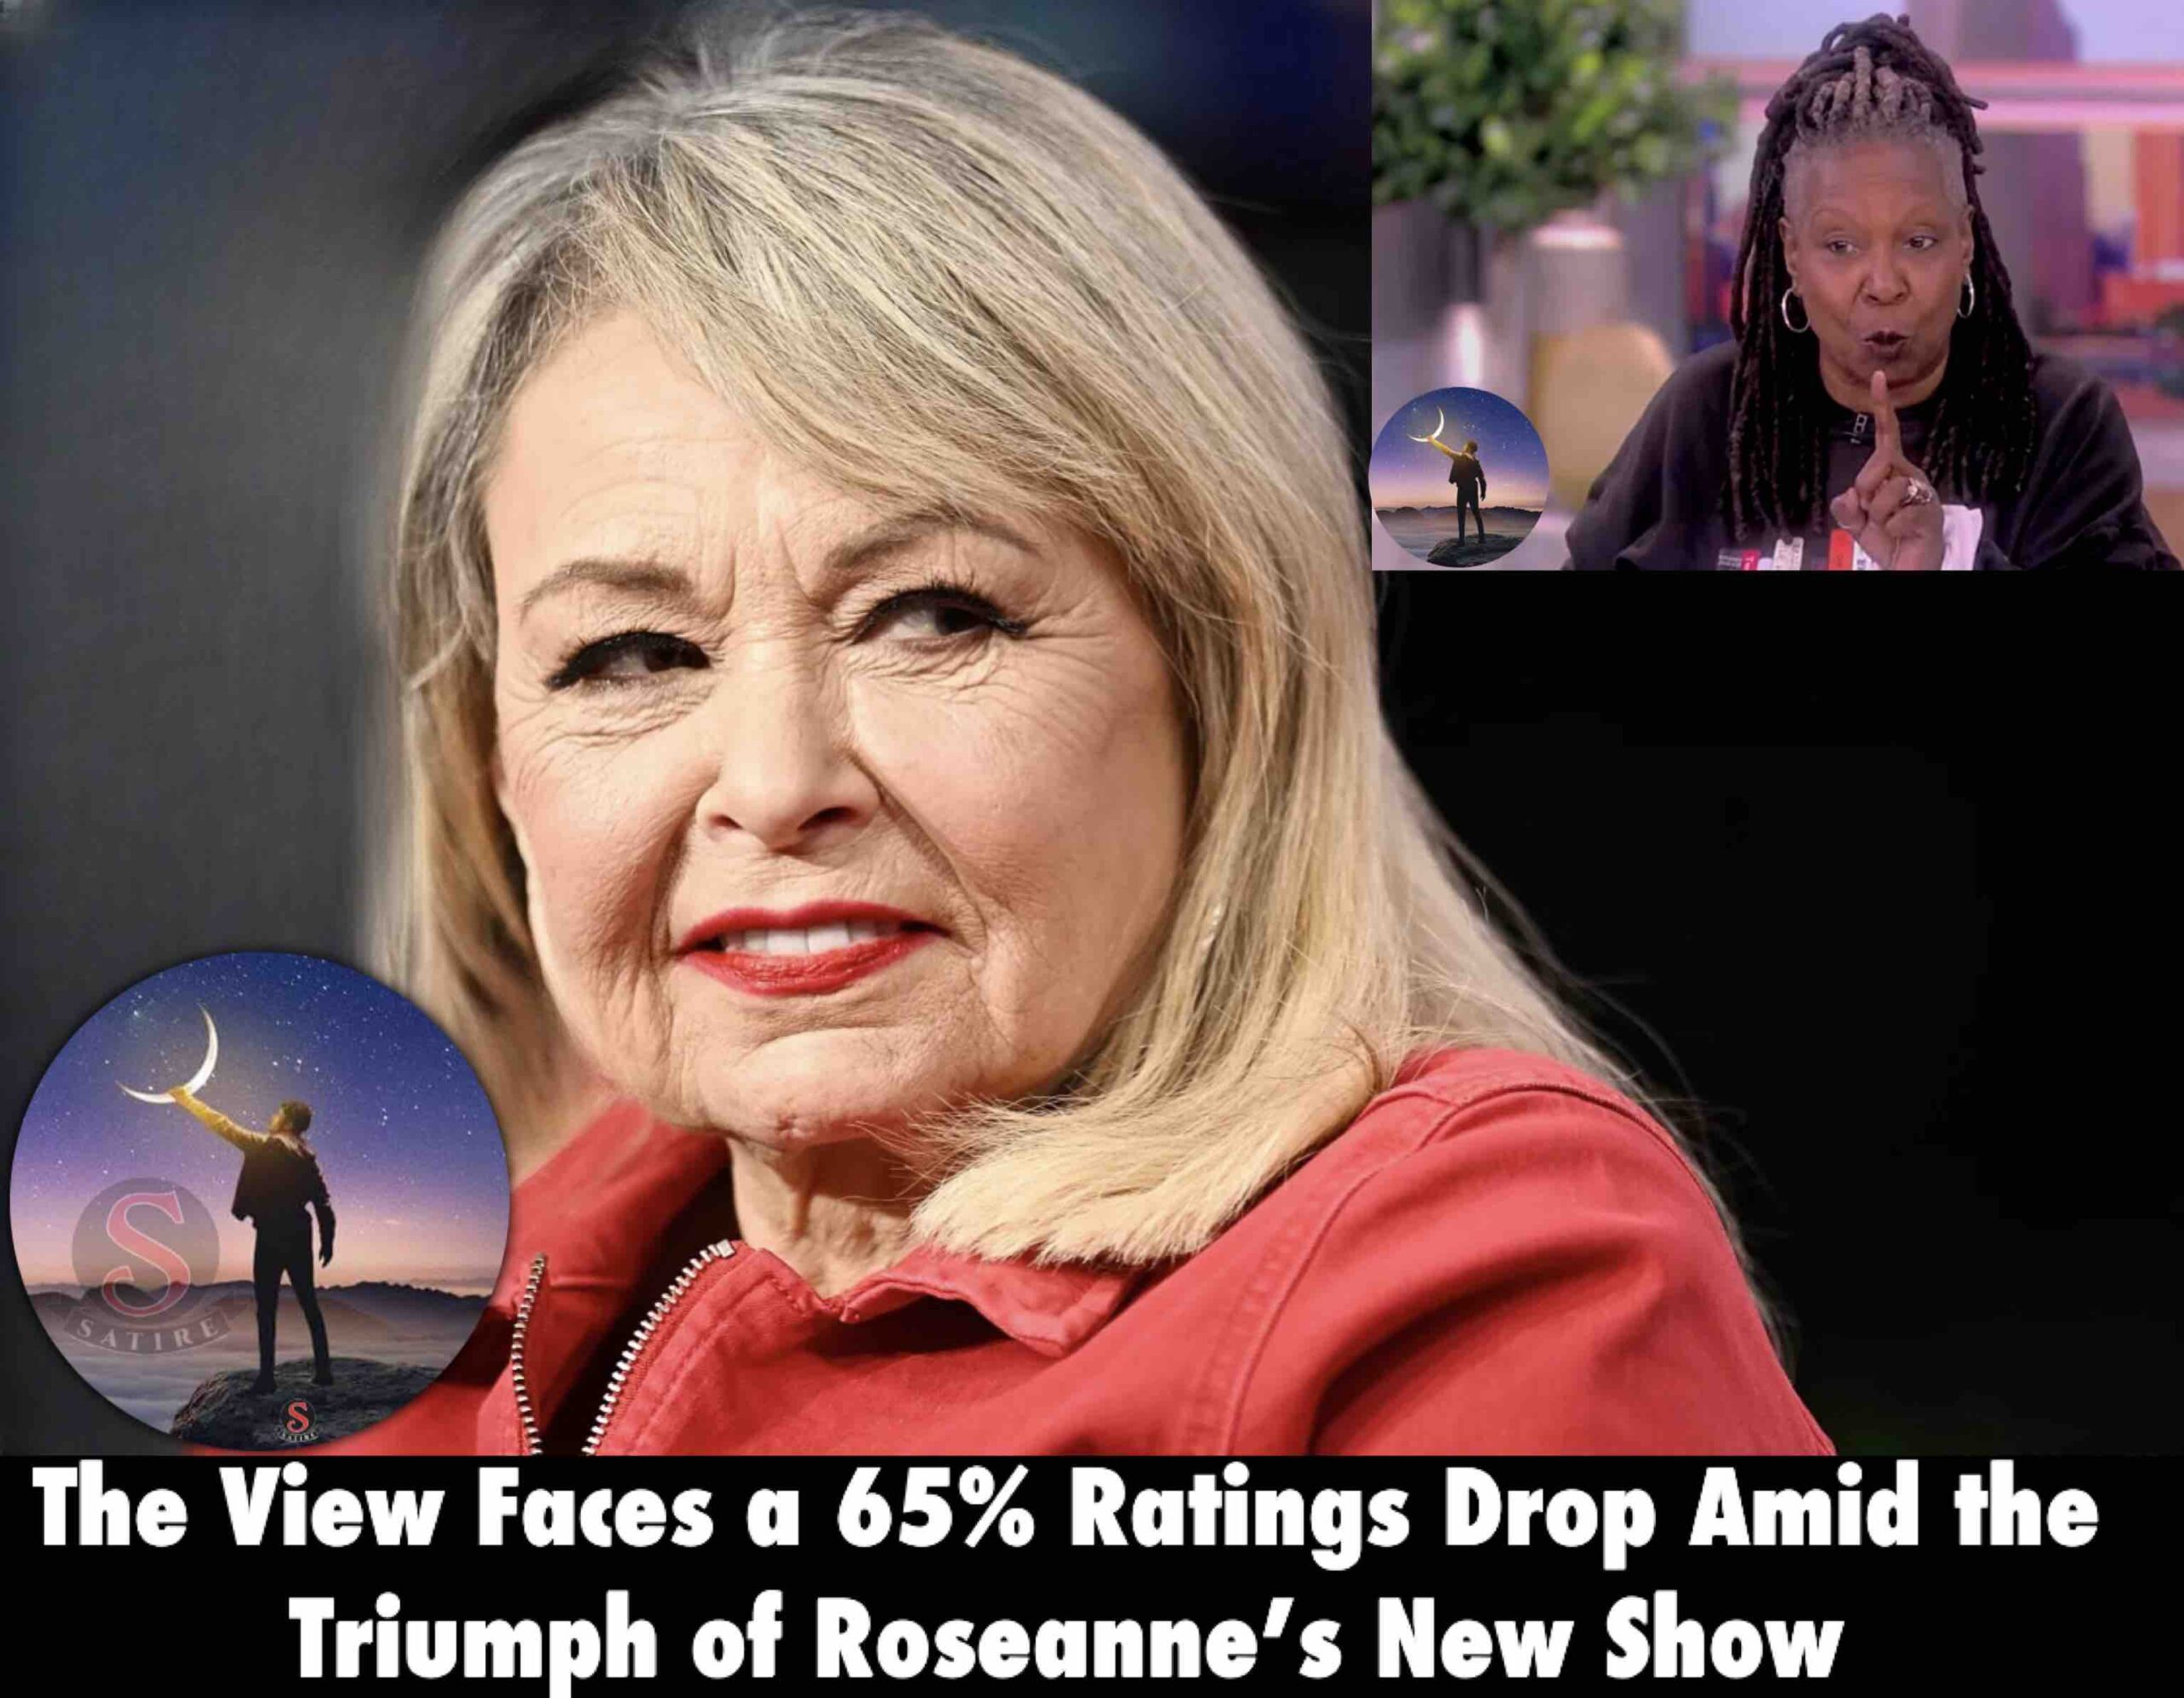 The View Faces a 65% Ratings Drop Amid the Triumph of Roseanne’s New Show